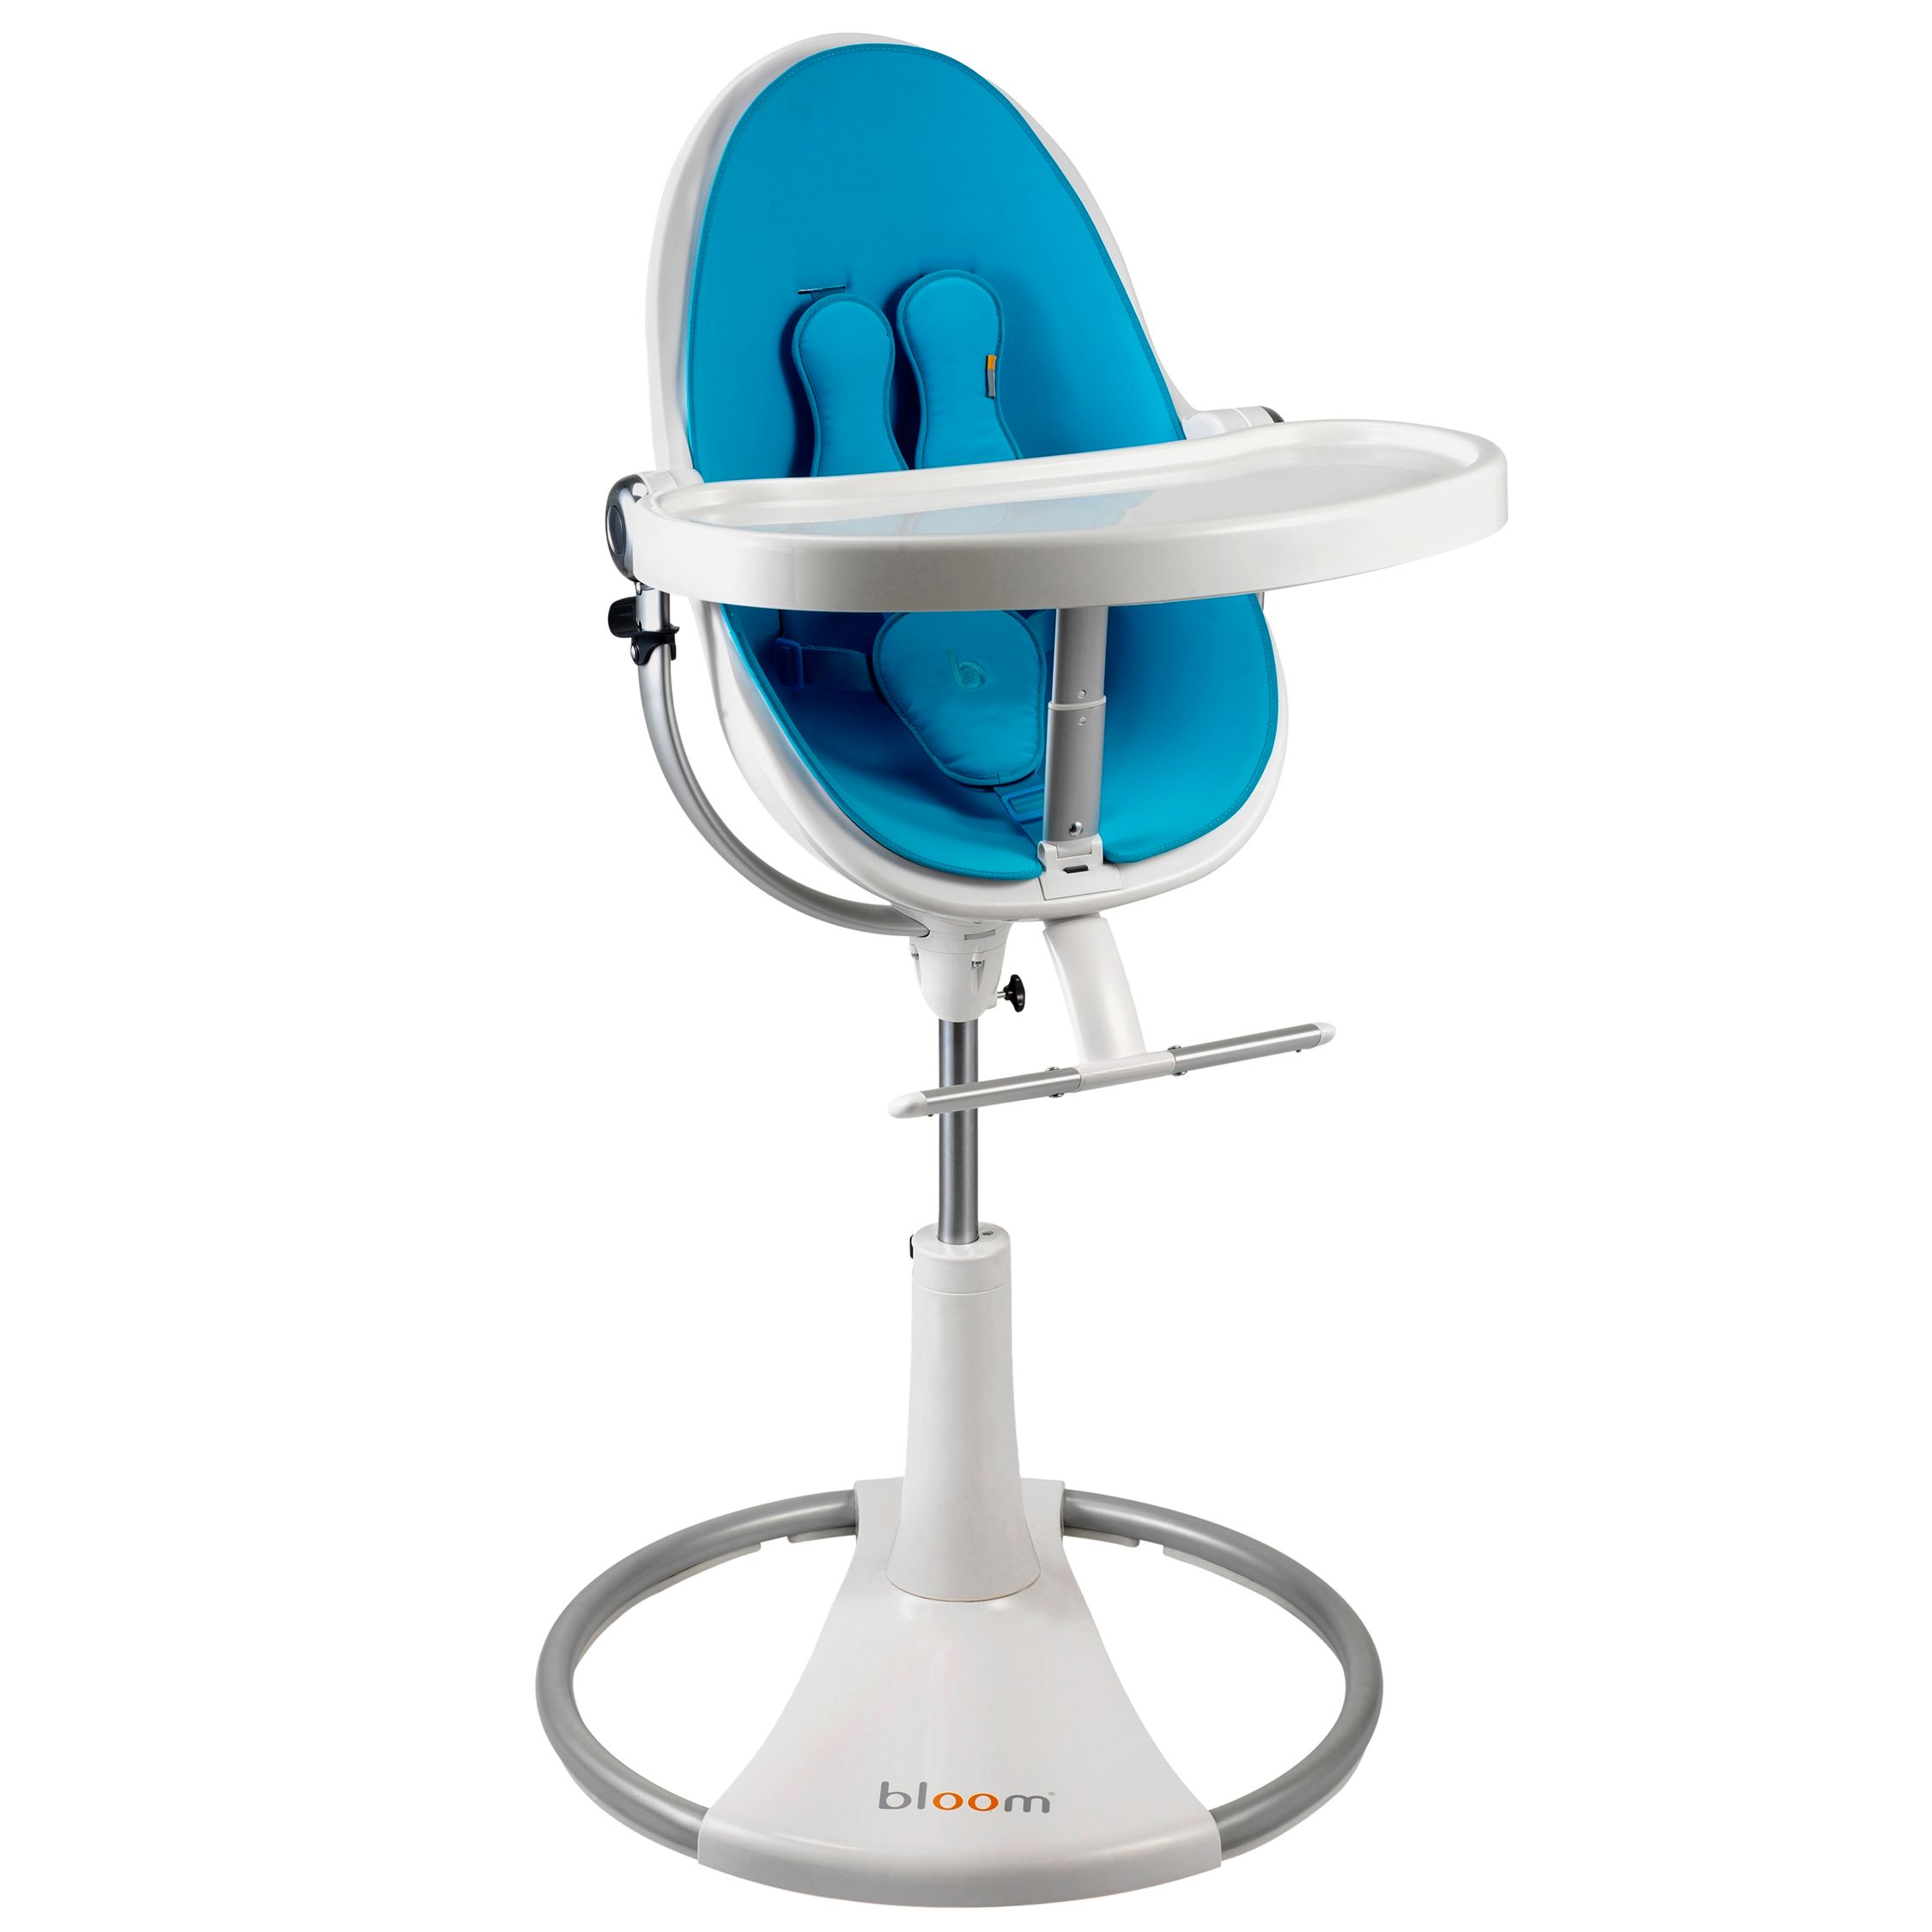 bloom Fresco Loft Contemporary Leatherette Baby Chair, Ivory White with Bermuda Blue at John Lewis